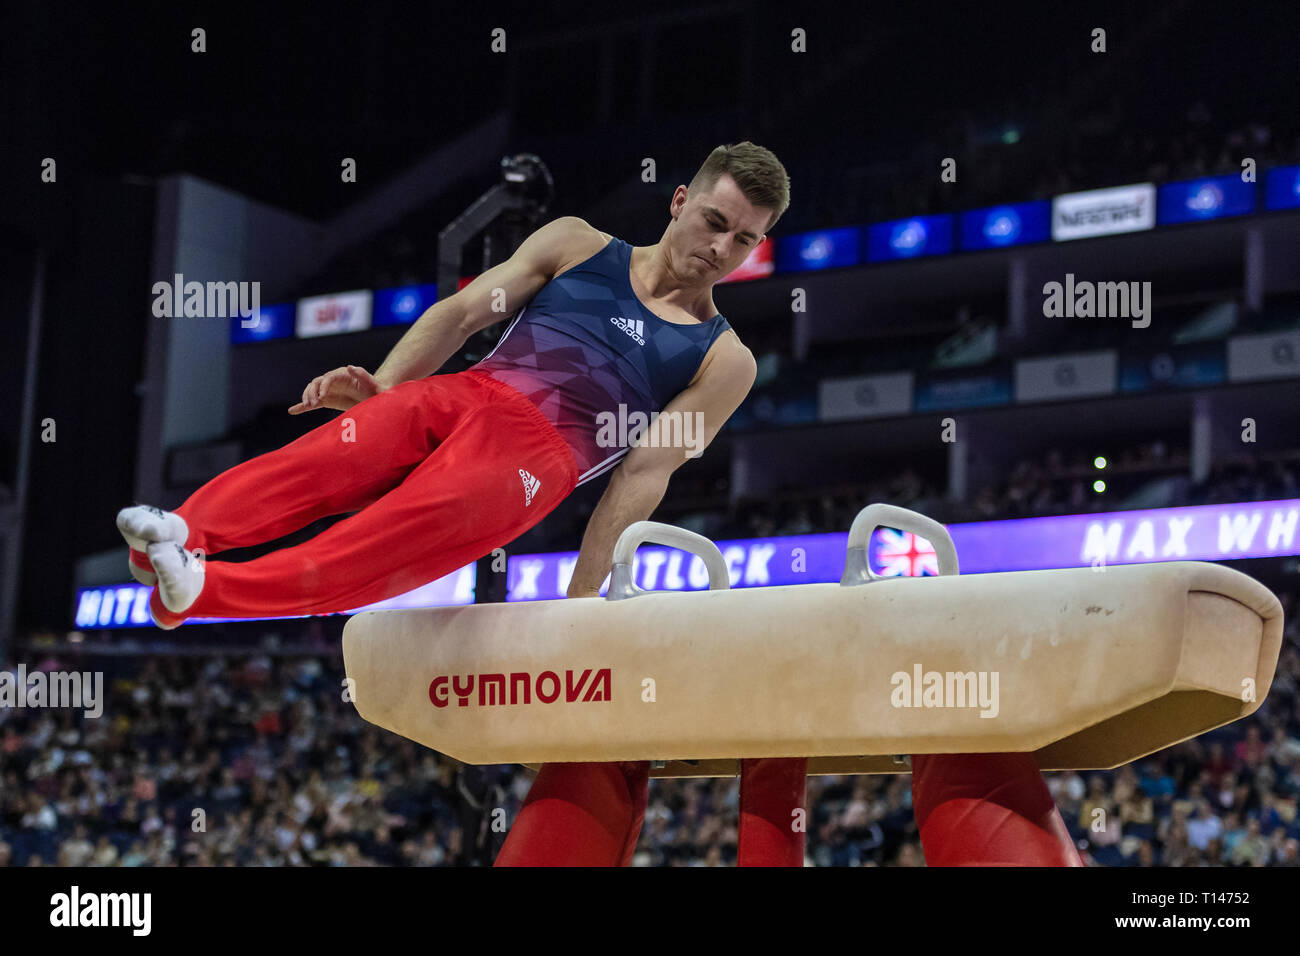 London, UK. 23rd March, 2019. Max Whitlock MBE performs on Pommel Horse during the Matchroom Multisport presents the 2019 Superstars of Gymnastics at The O2 Arena on Saturday, 23 March 2019. LONDON ENGLAND. Credit: Taka G Wu/Alamy News Stock Photo